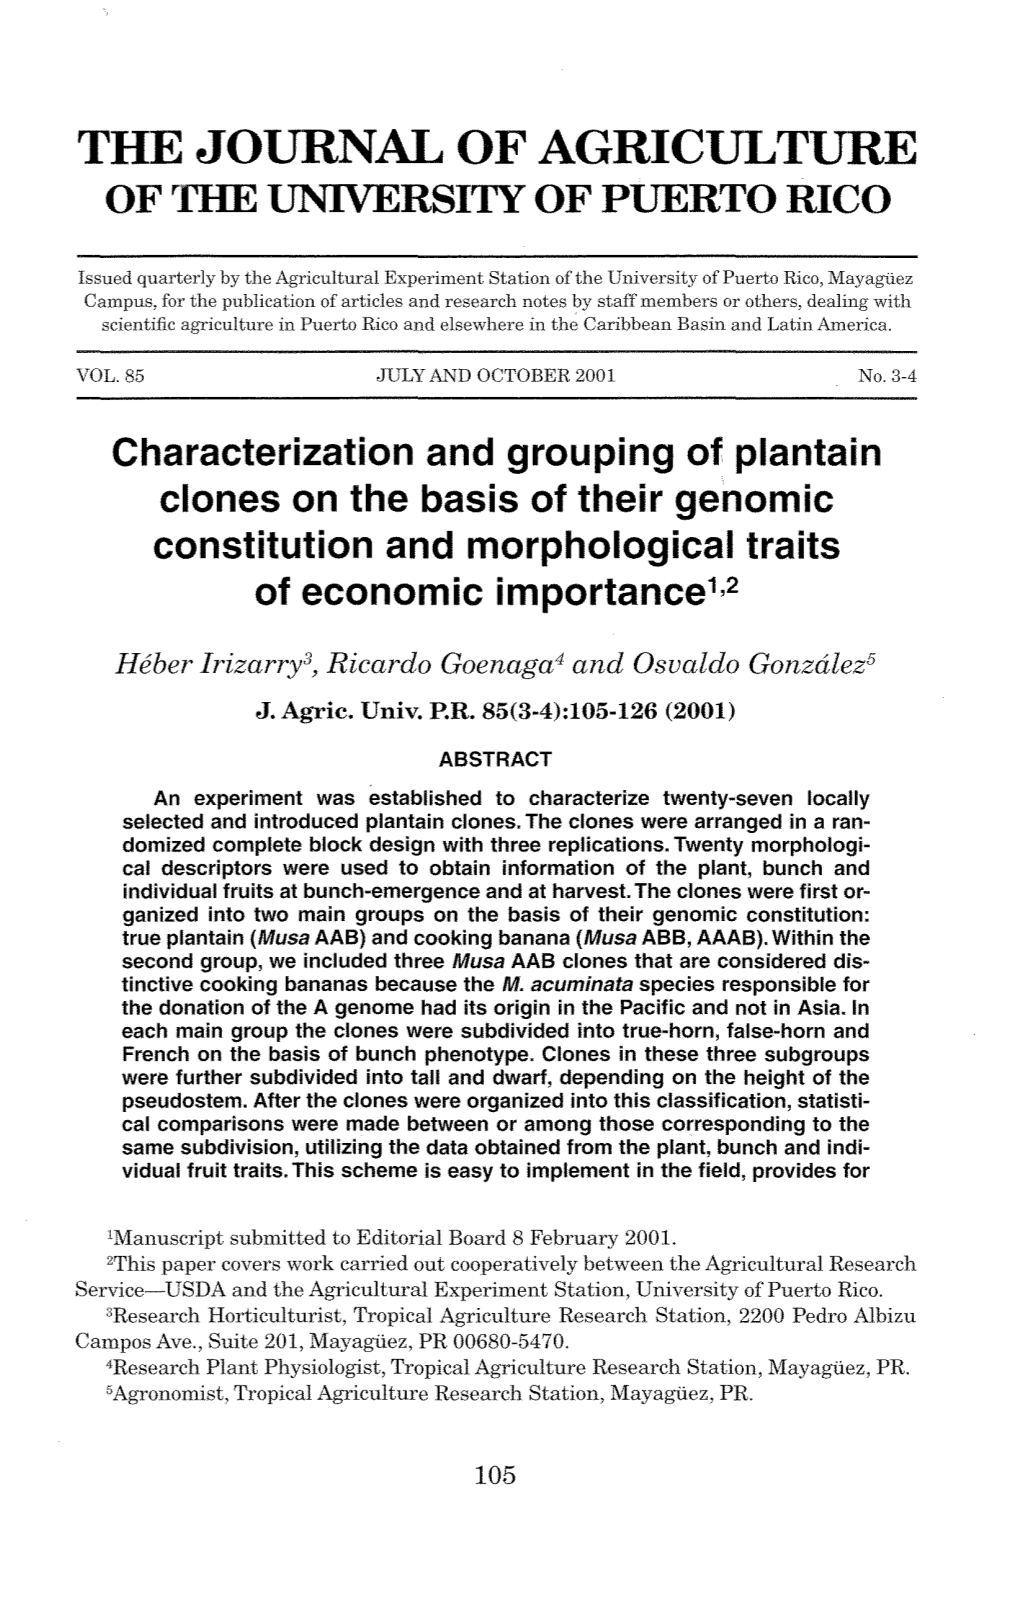 Characterization and Grouping of Plantain Clones on the Basis of Their Genomic Constitution and Morphological Traits 1 of Economic Importance ,2